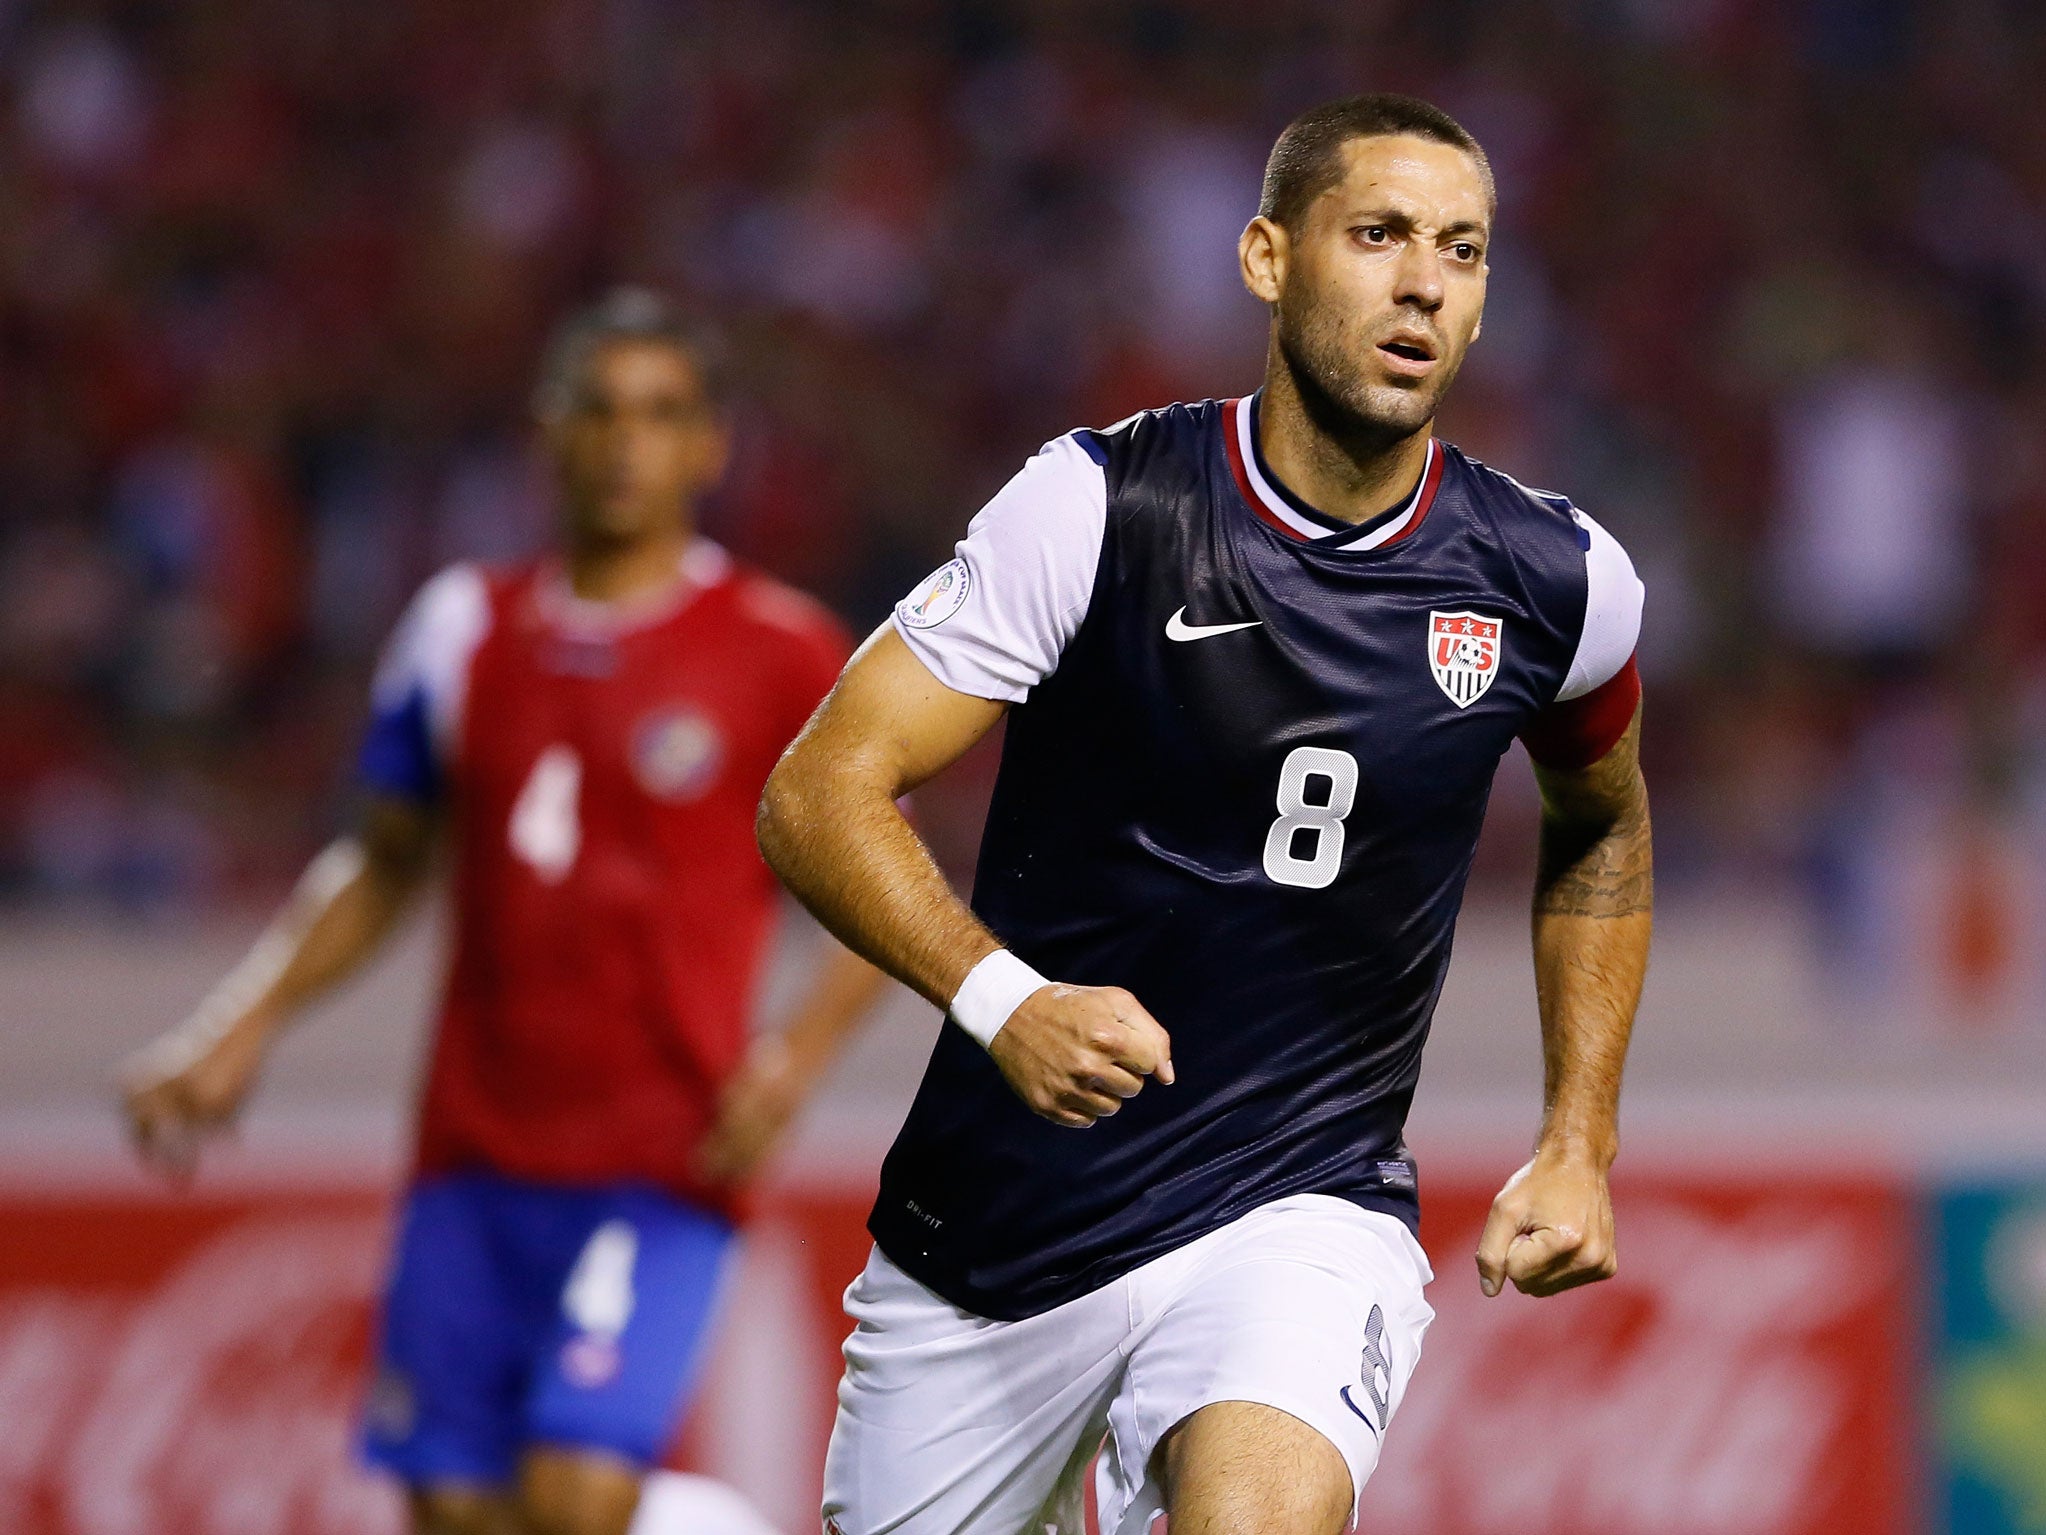 Transfer news: Fulham hope to bring Clint Dempsey back with